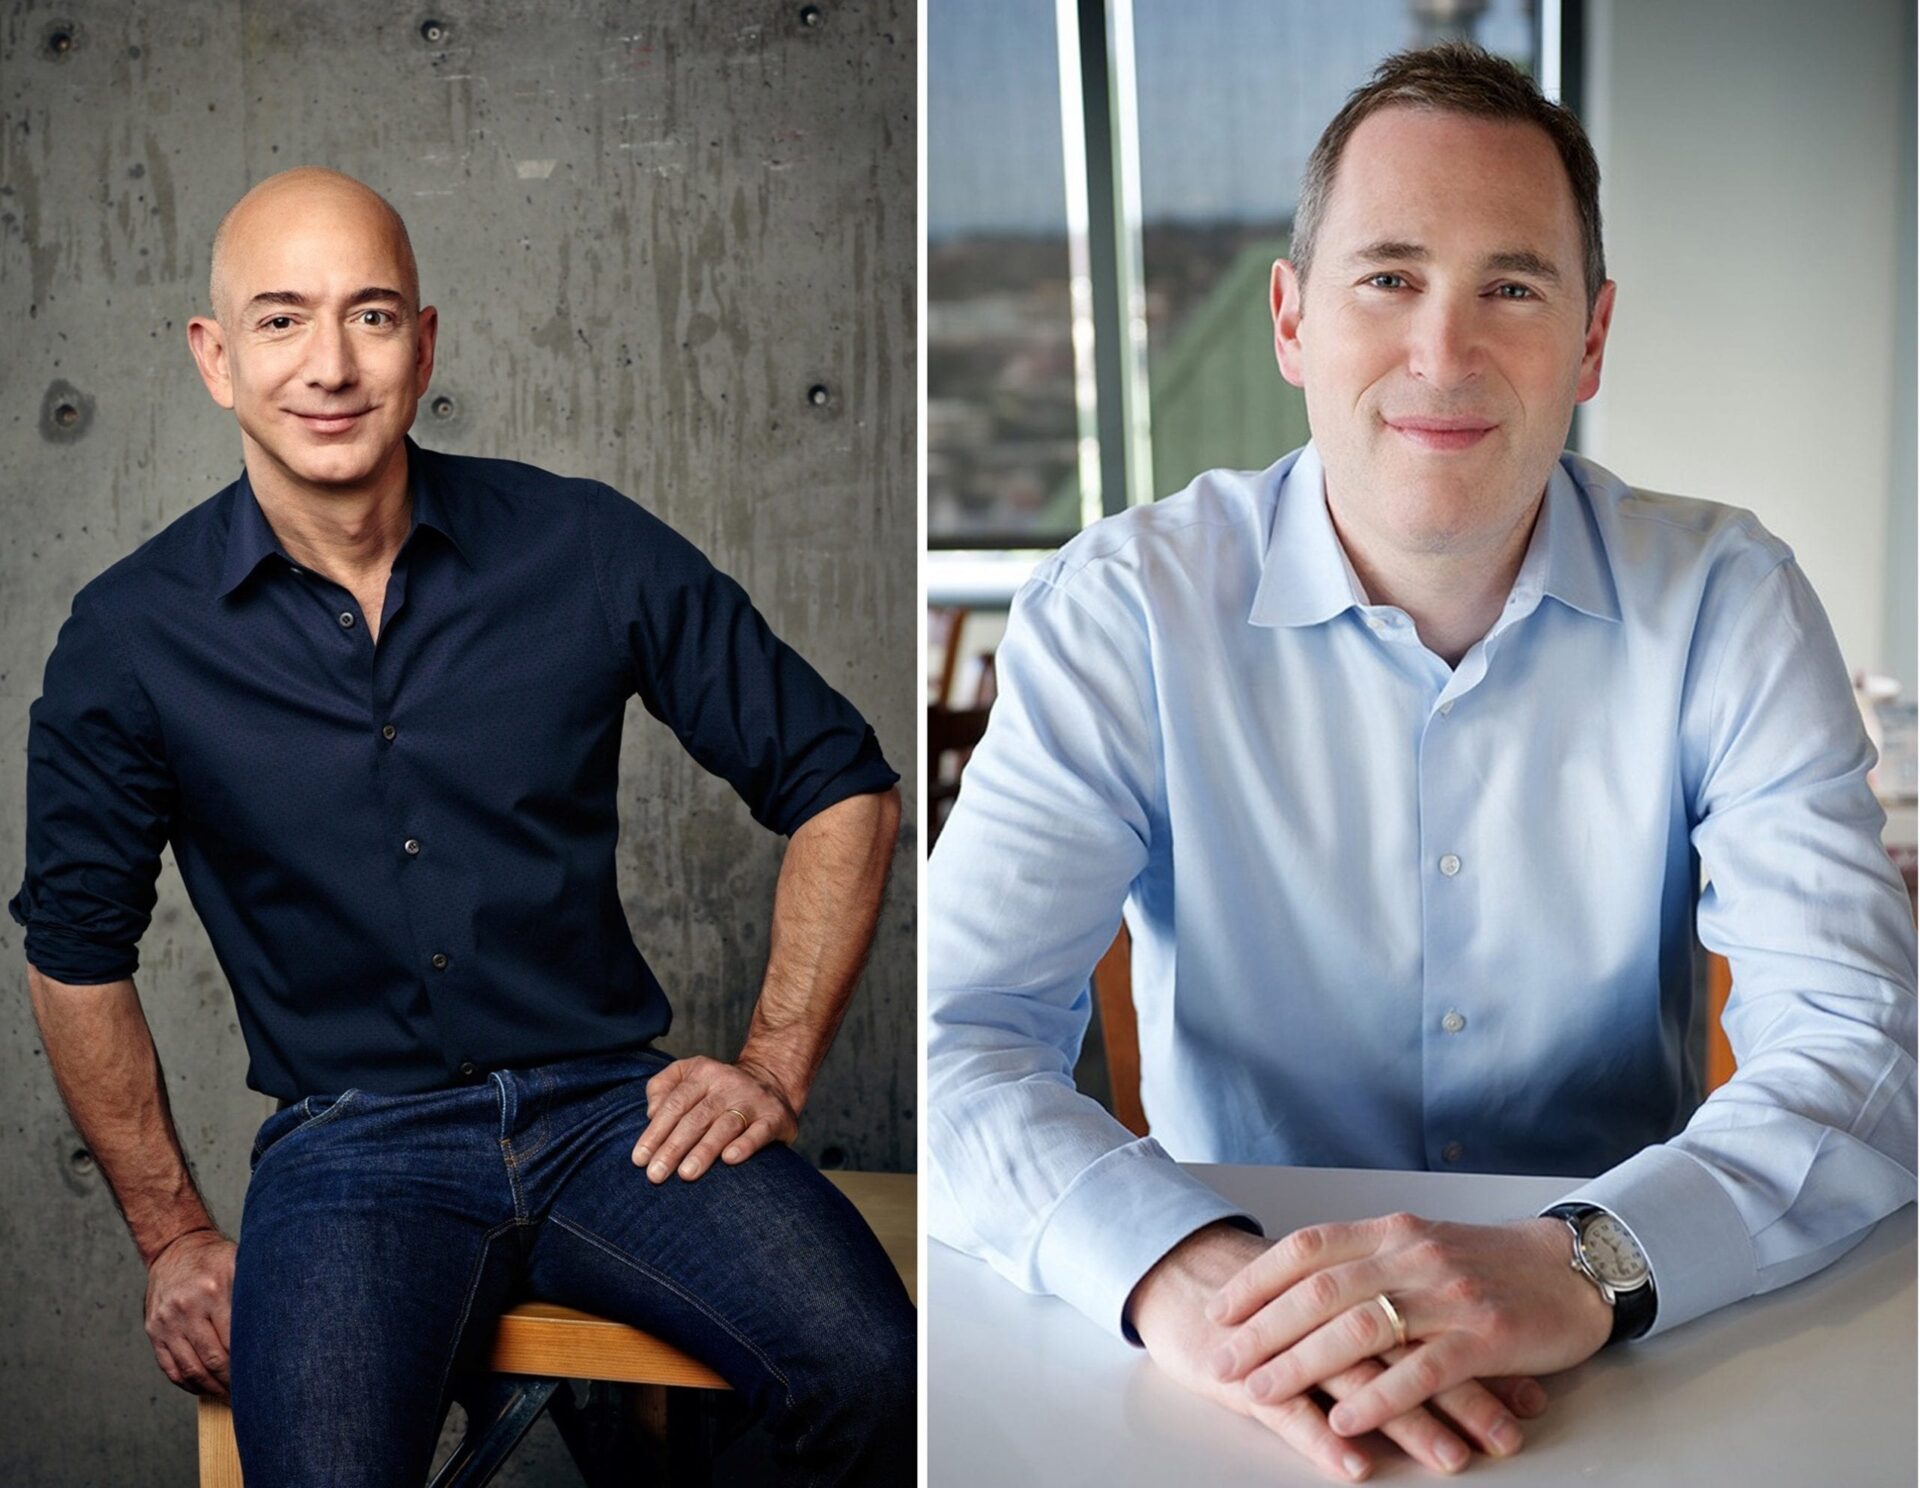 Amazon CEO Jeff Bezos Steps Down: Andy Jassy Takes Over as CEO